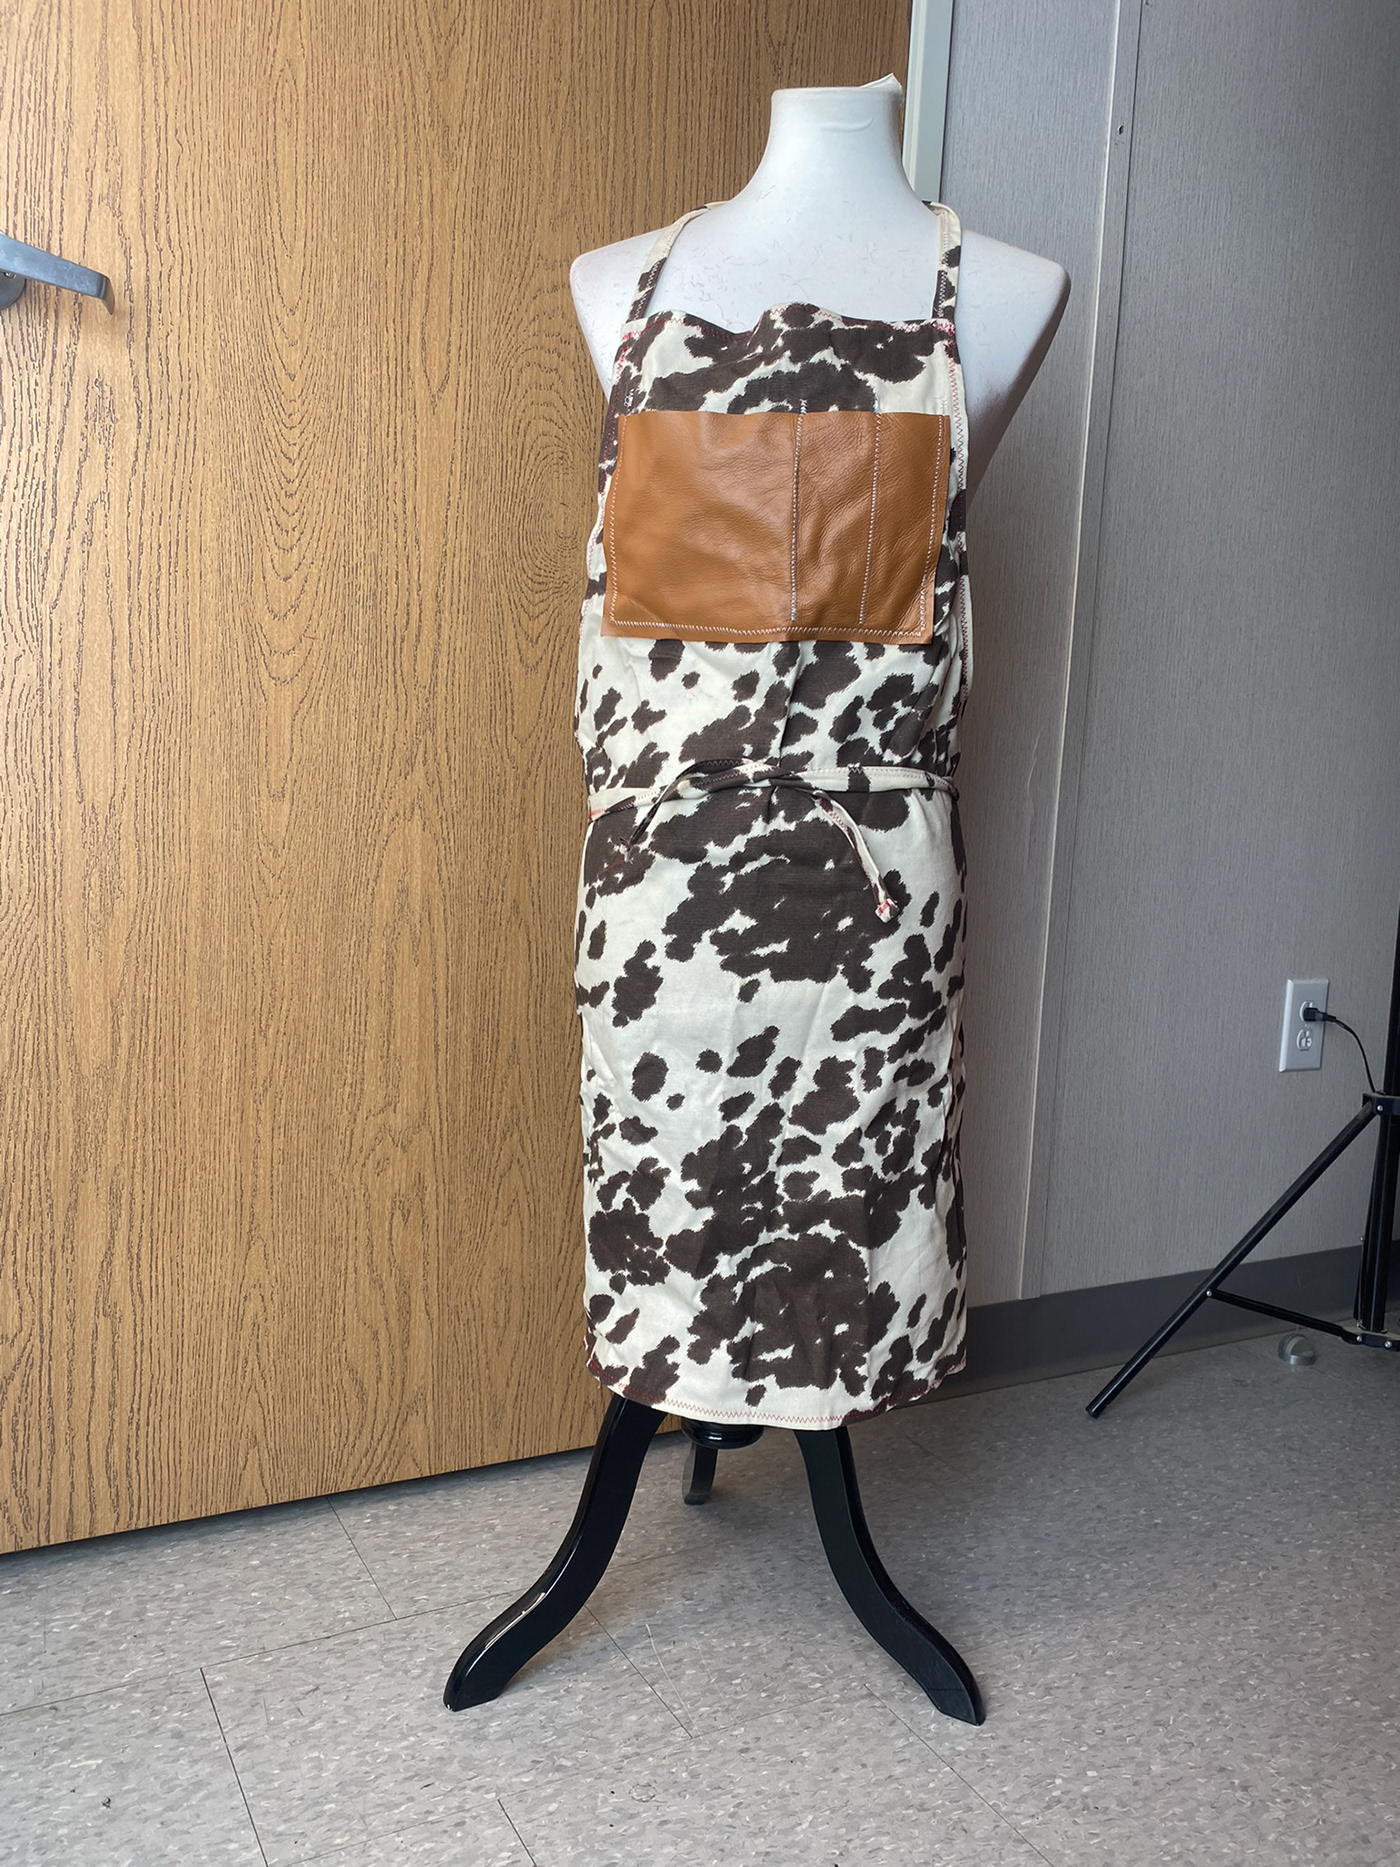 sewing work flow design Fashion  apron craft User Centered Design Experience